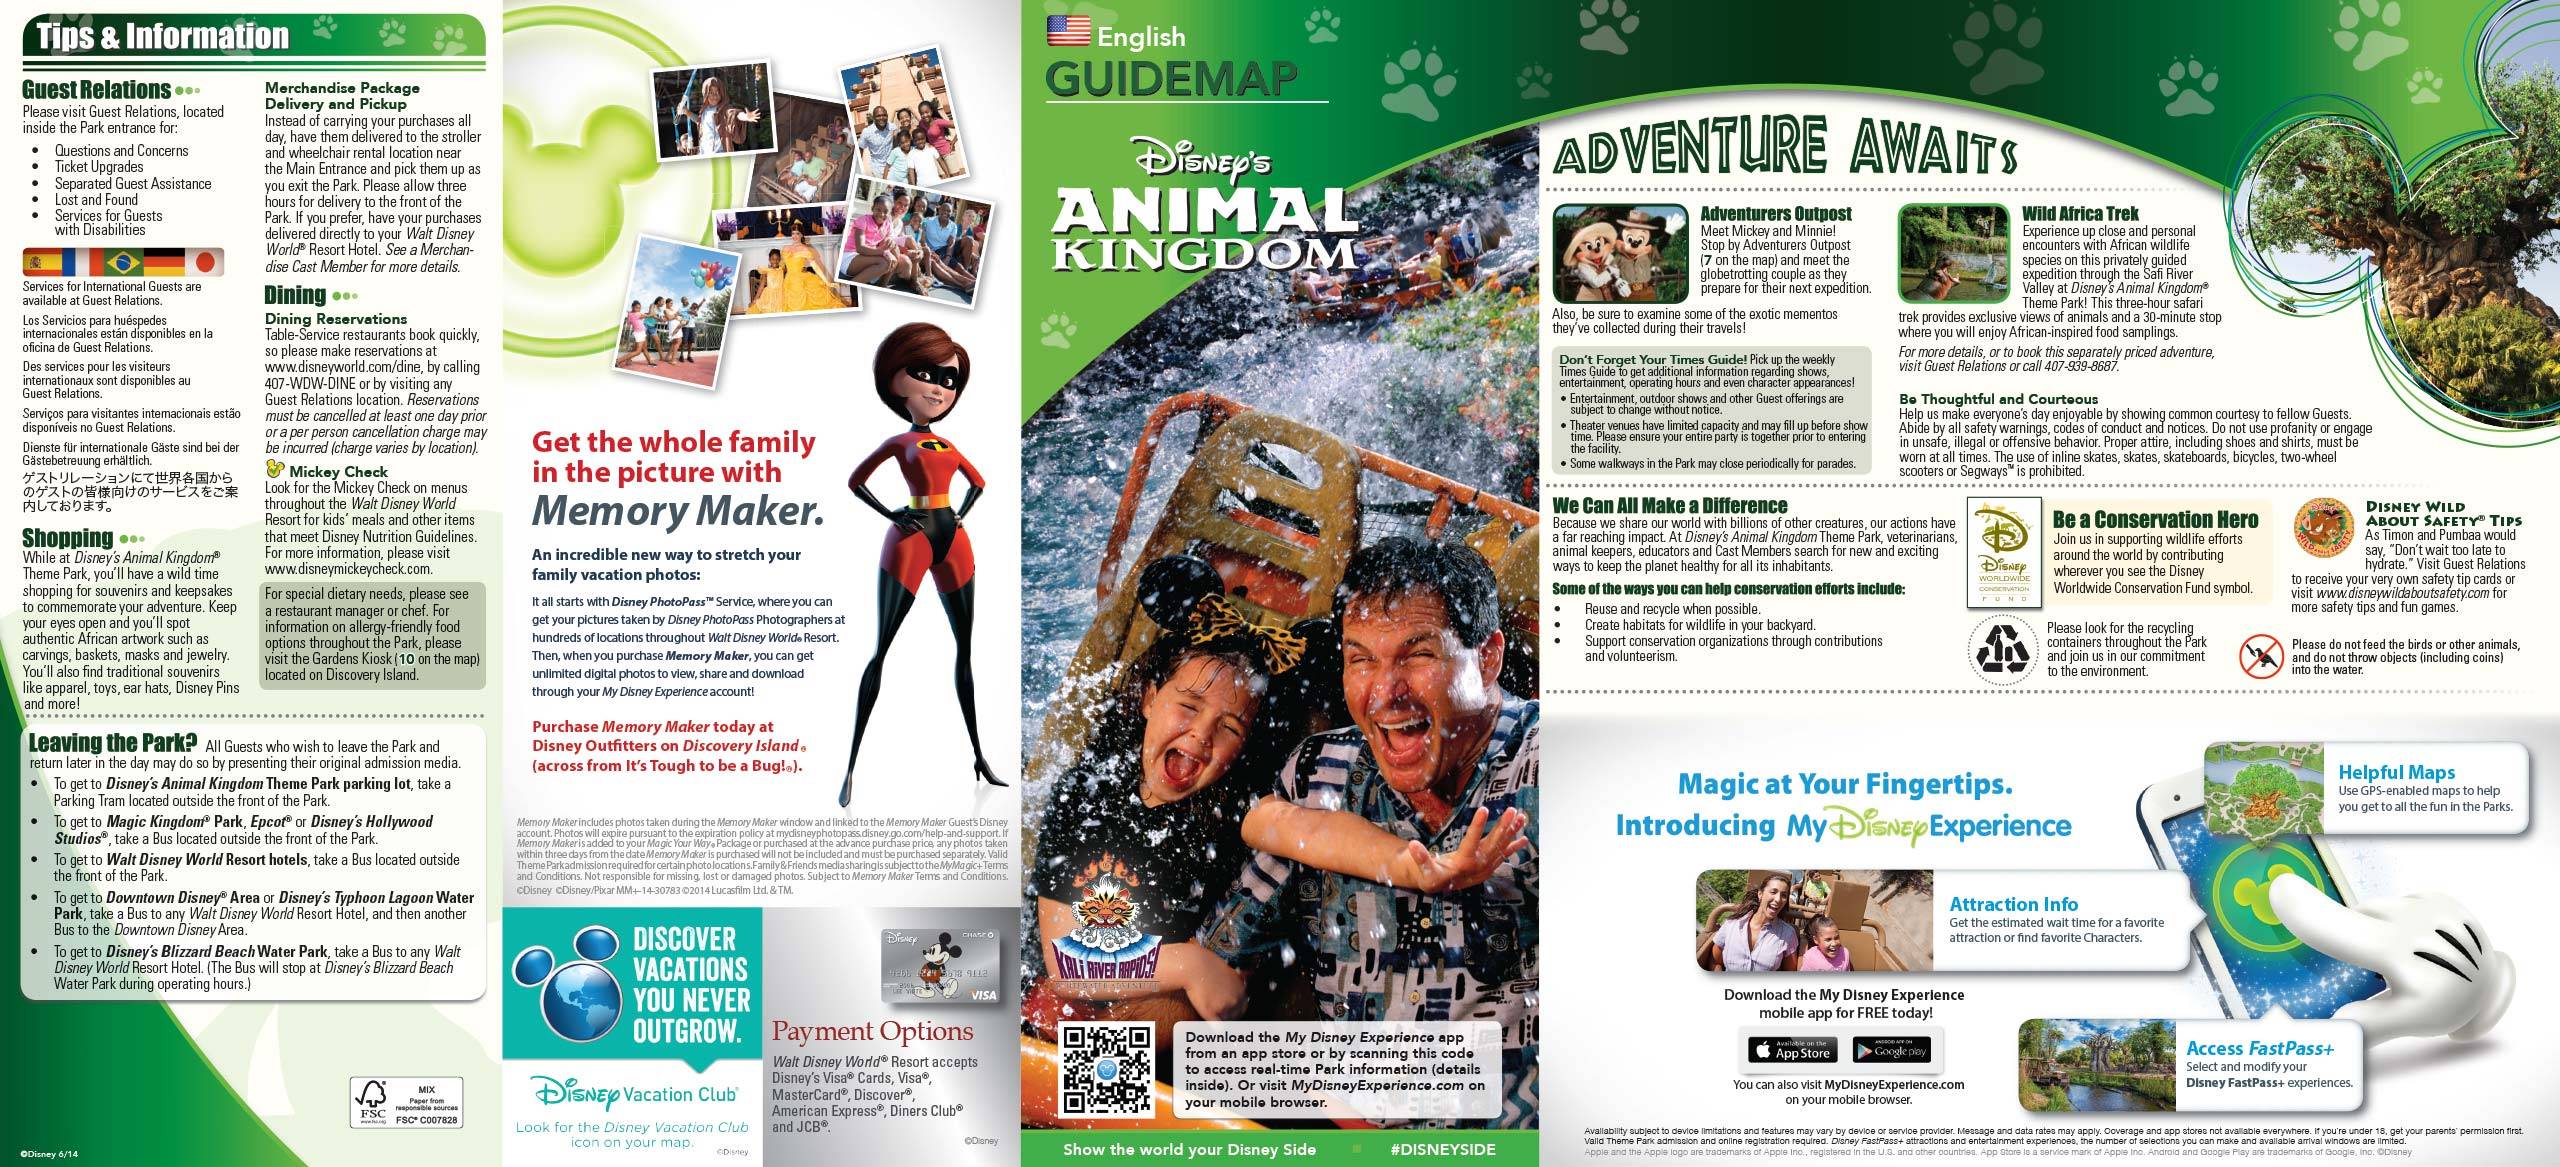 New Disney's Animal Kingdom Park Guide Map with Harambe Theater District addition - front